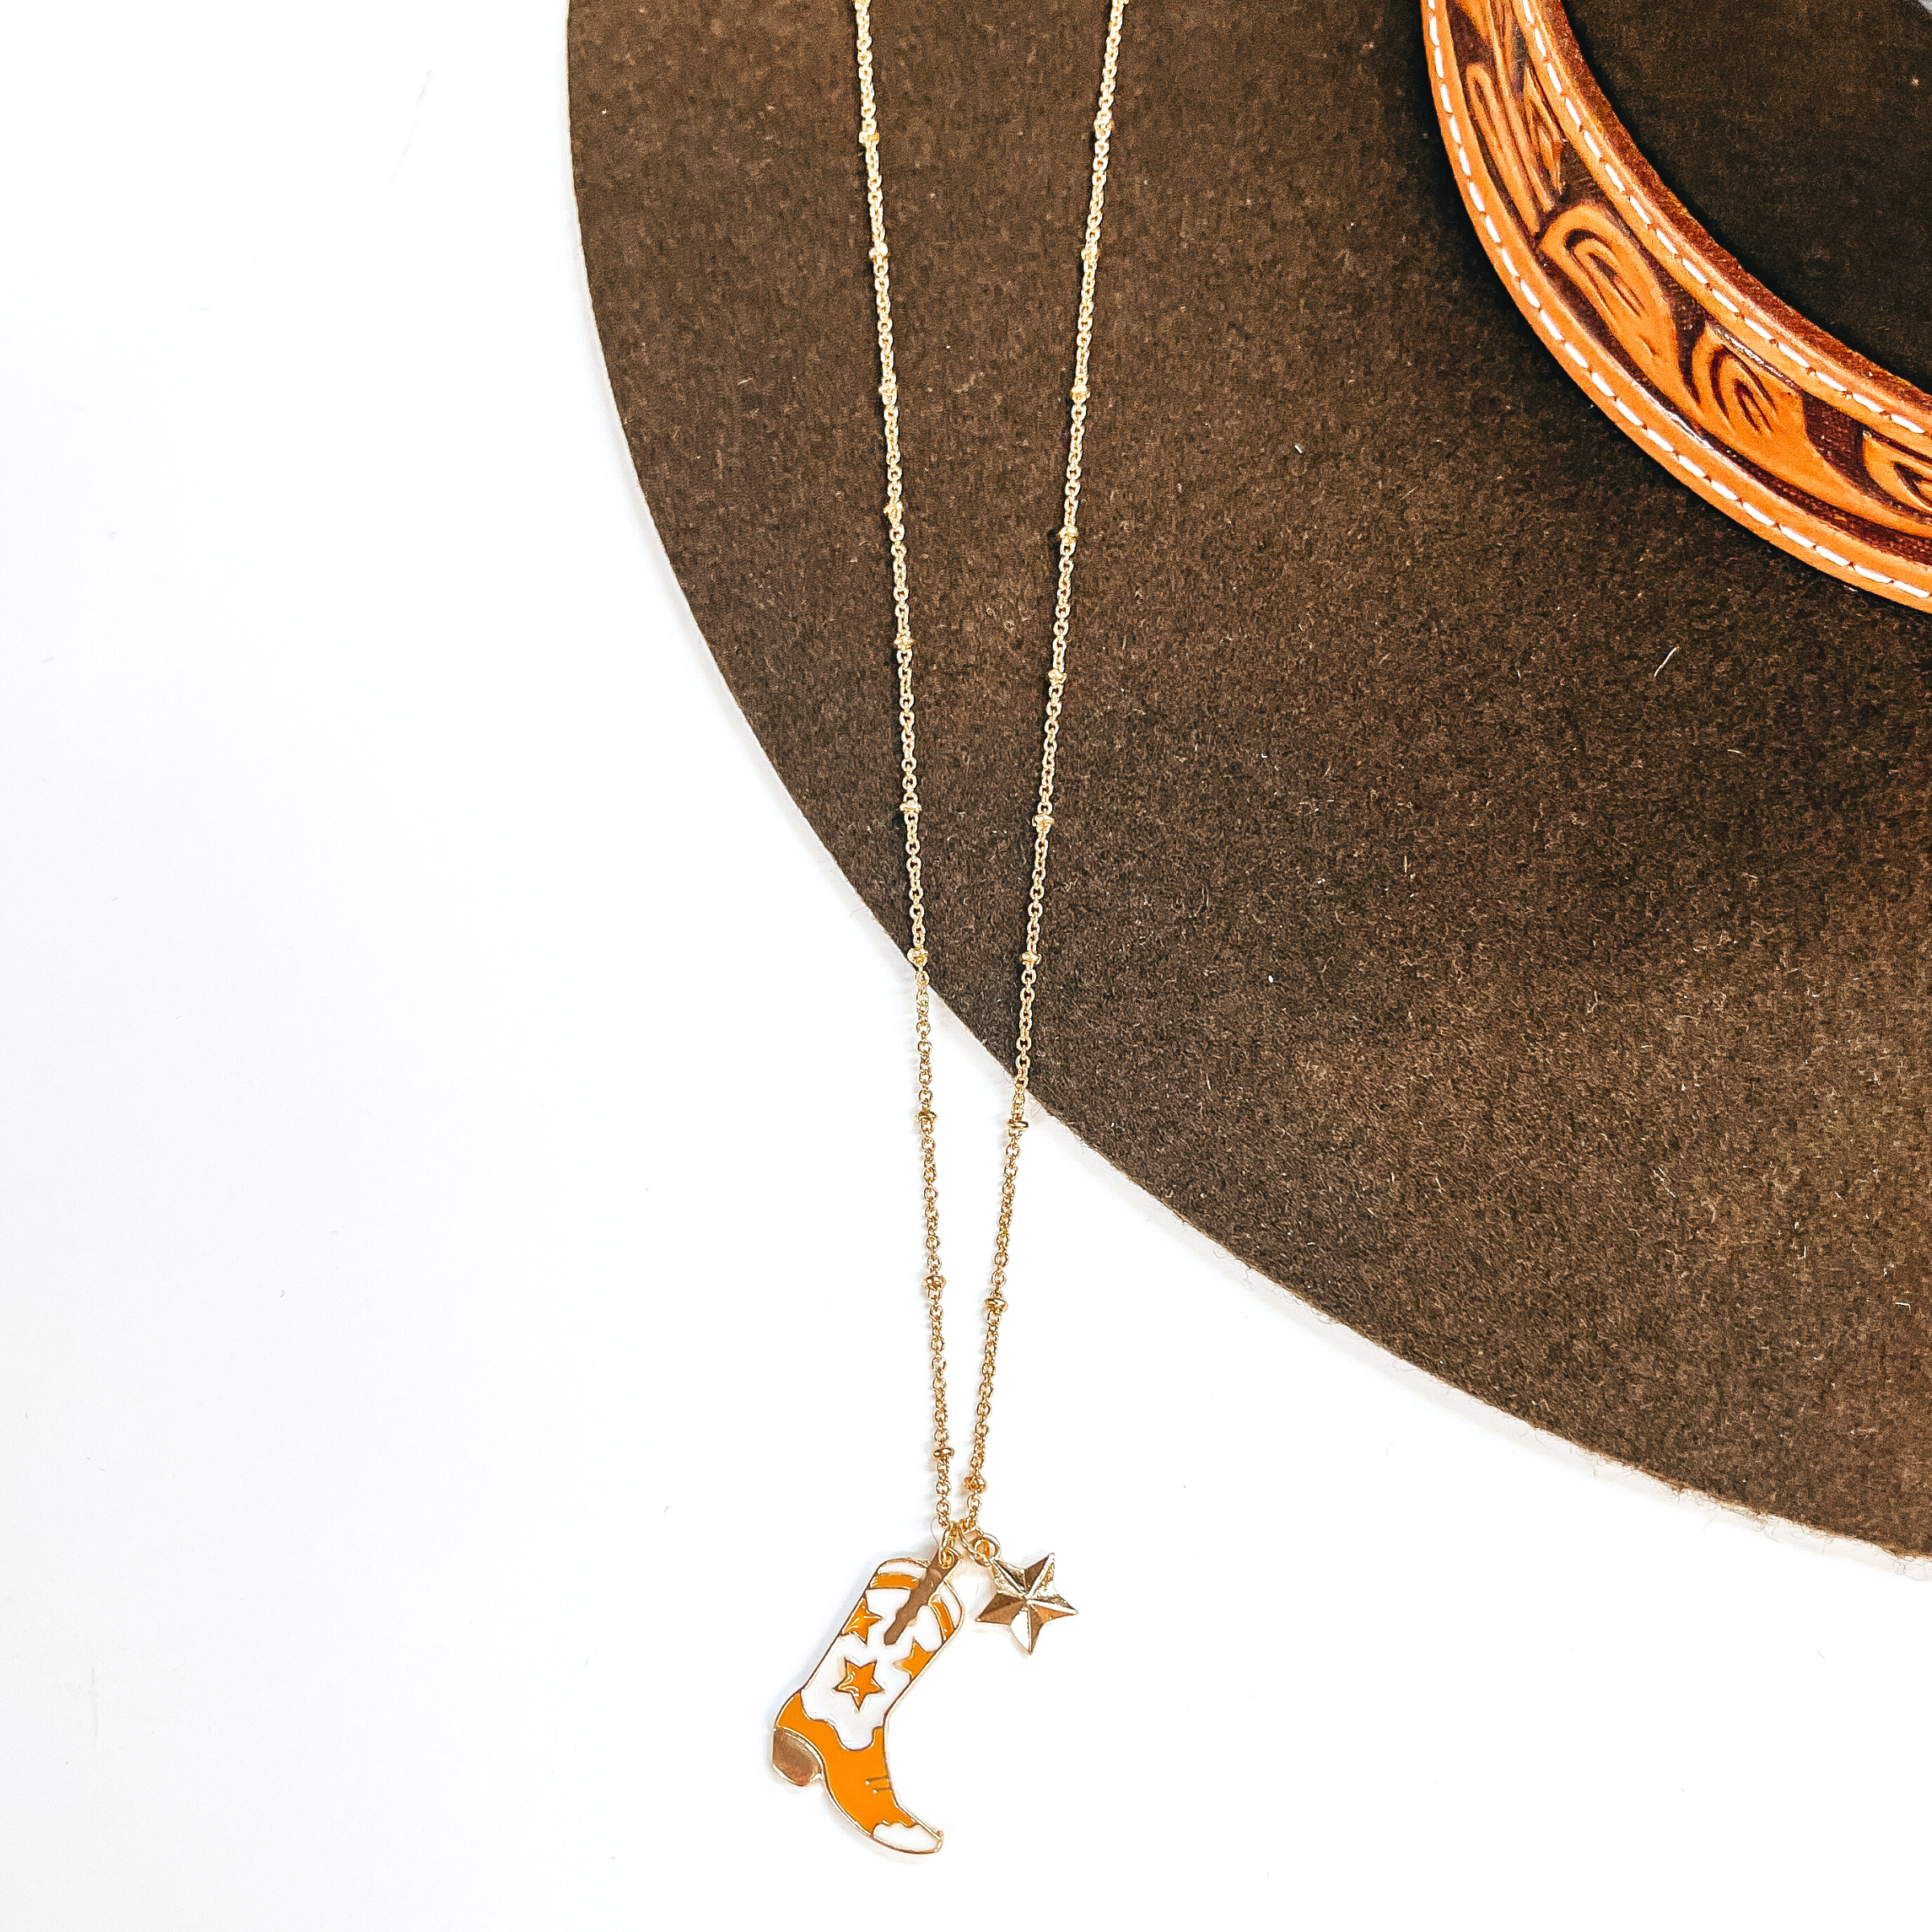 Gold Necklace with Star Boot Pendant in Ivory and Tan - Giddy Up Glamour Boutique